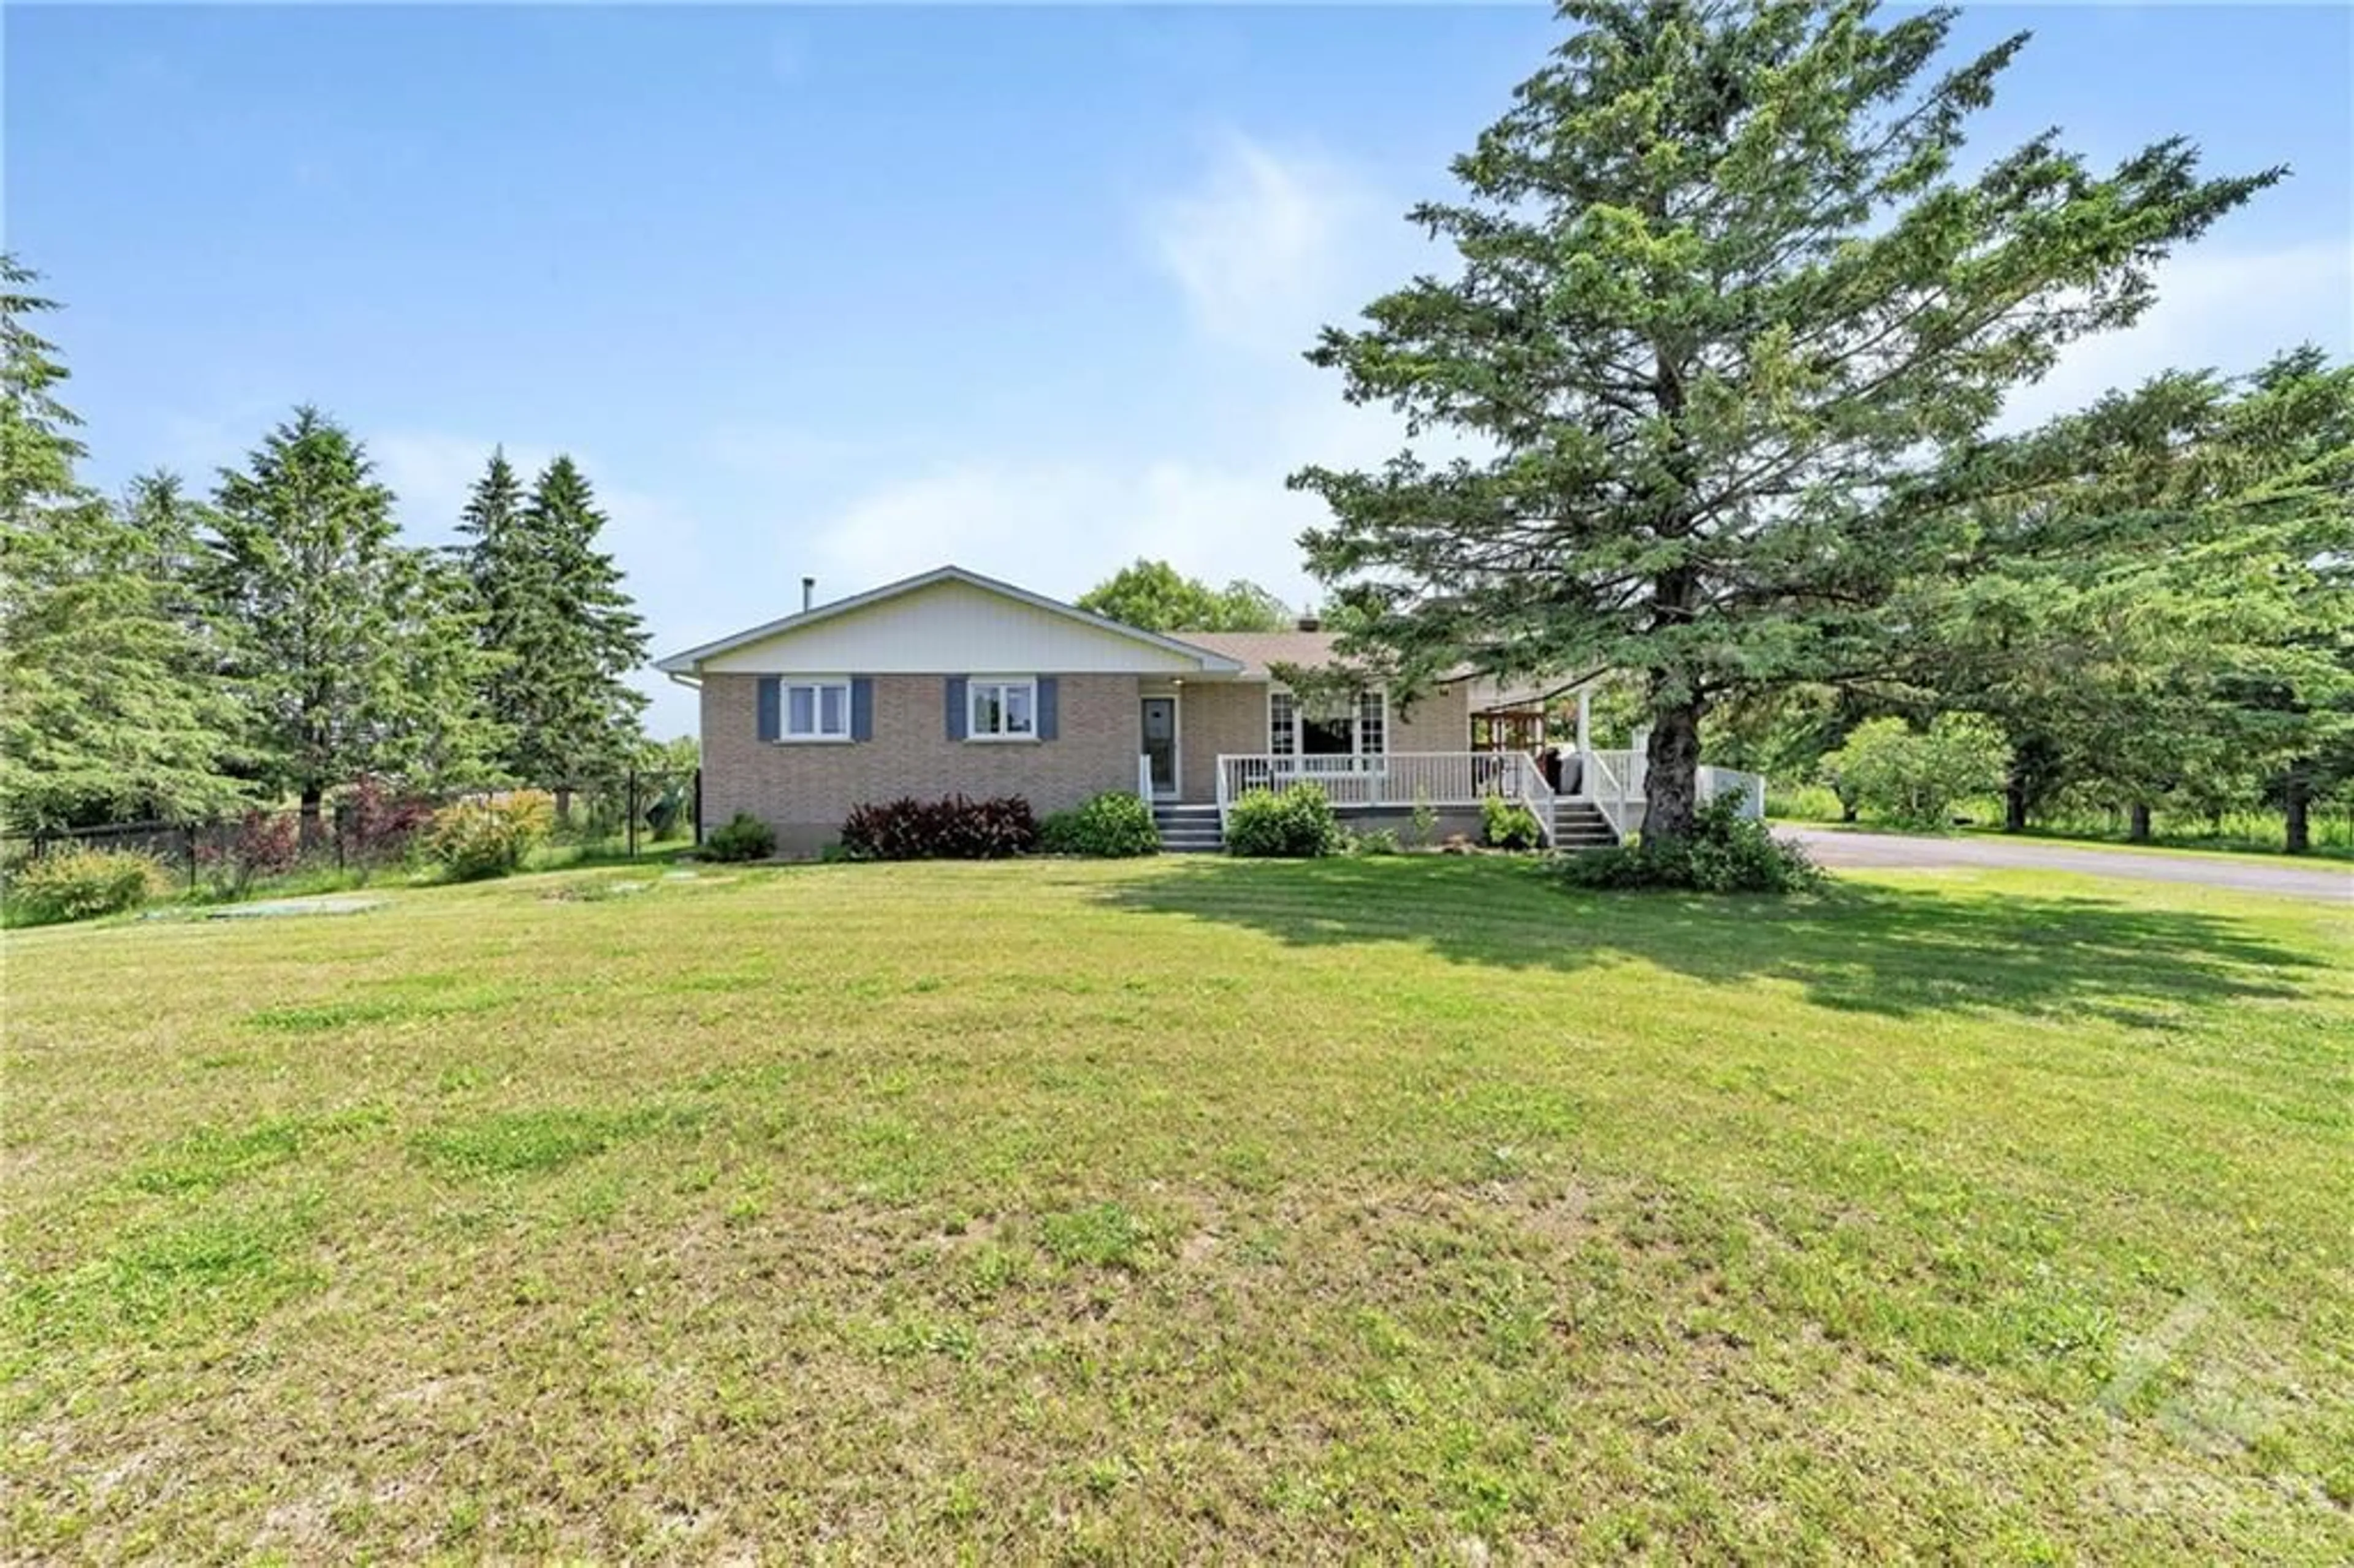 Frontside or backside of a home for 2503 DUNNING Rd, Ottawa Ontario K0A 3E0